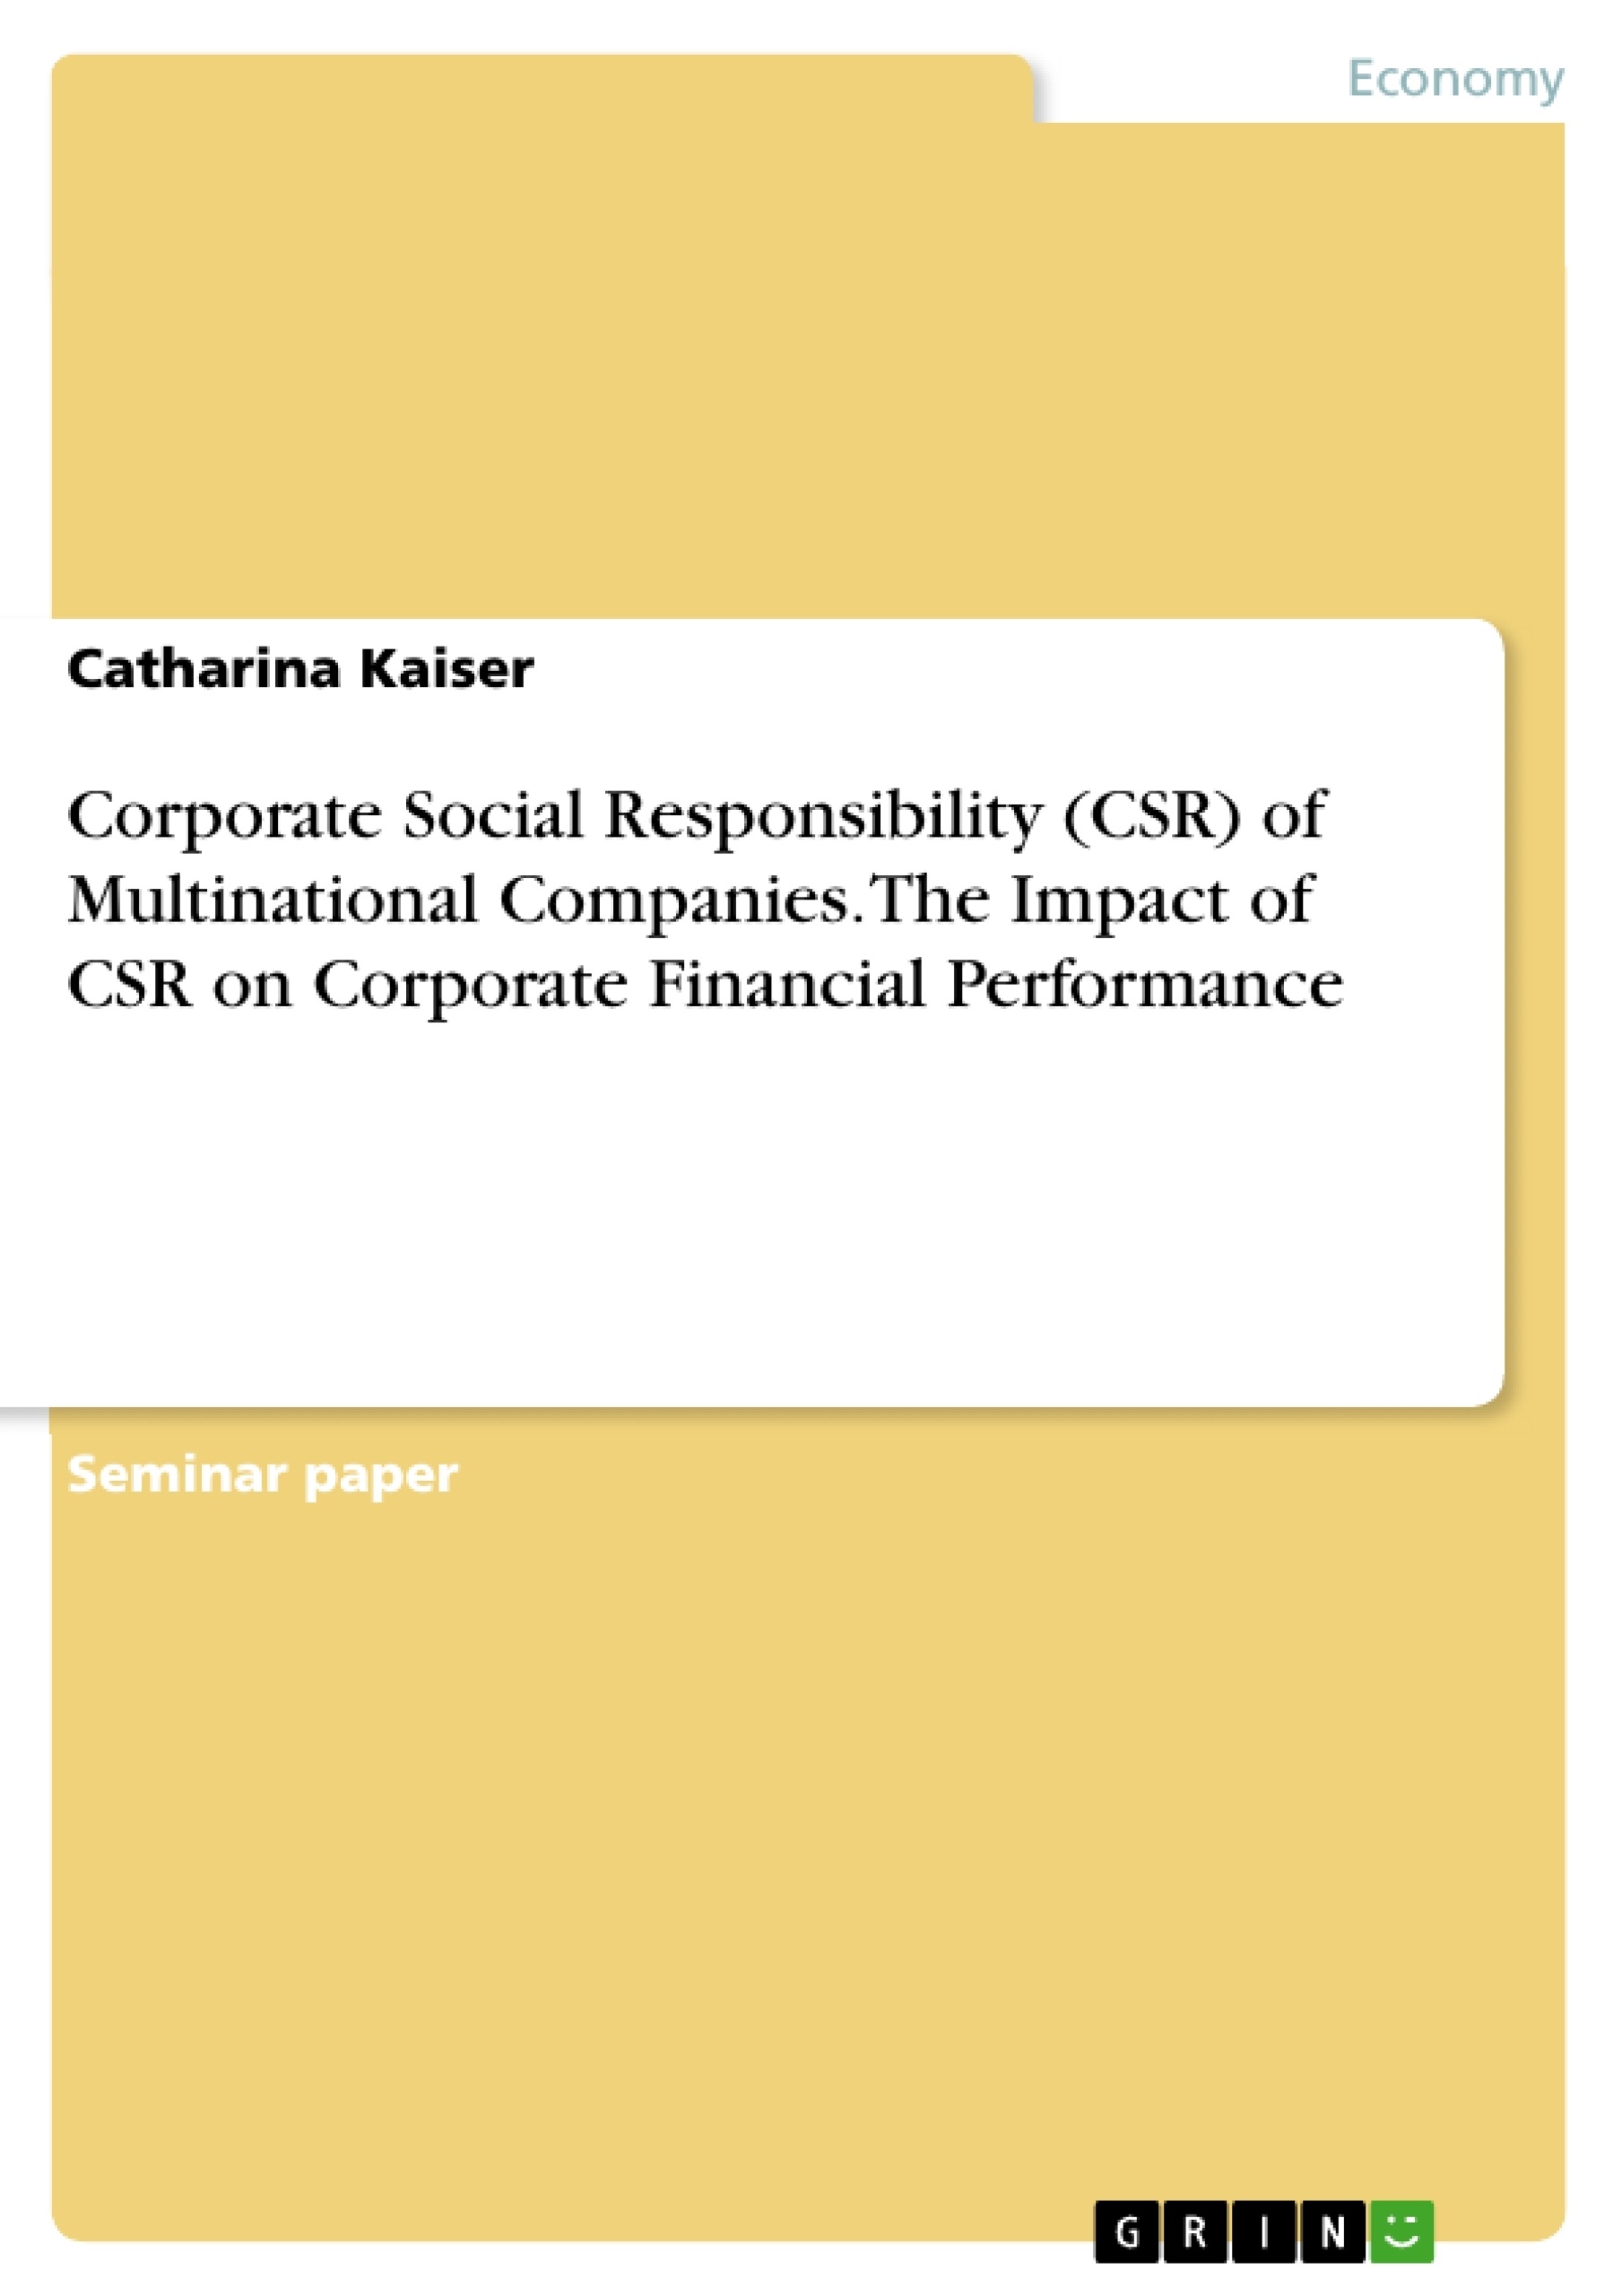 Title: Corporate Social Responsibility (CSR) of Multinational Companies. The Impact of CSR on Corporate Financial Performance